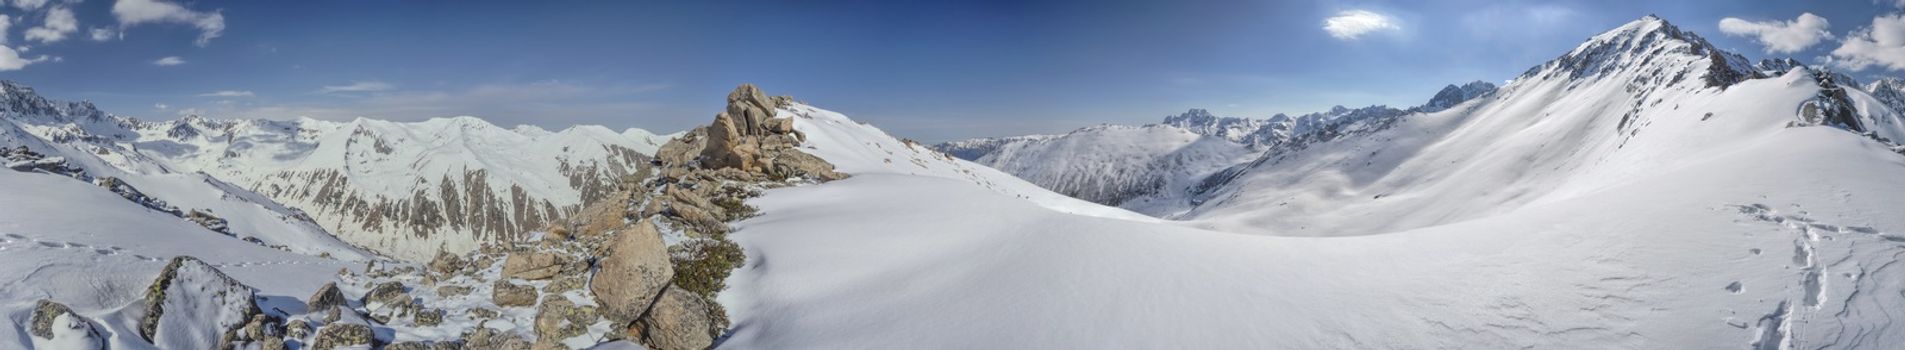 Scenic panorama of snowy slopes of Kackar Mountains in Turkey